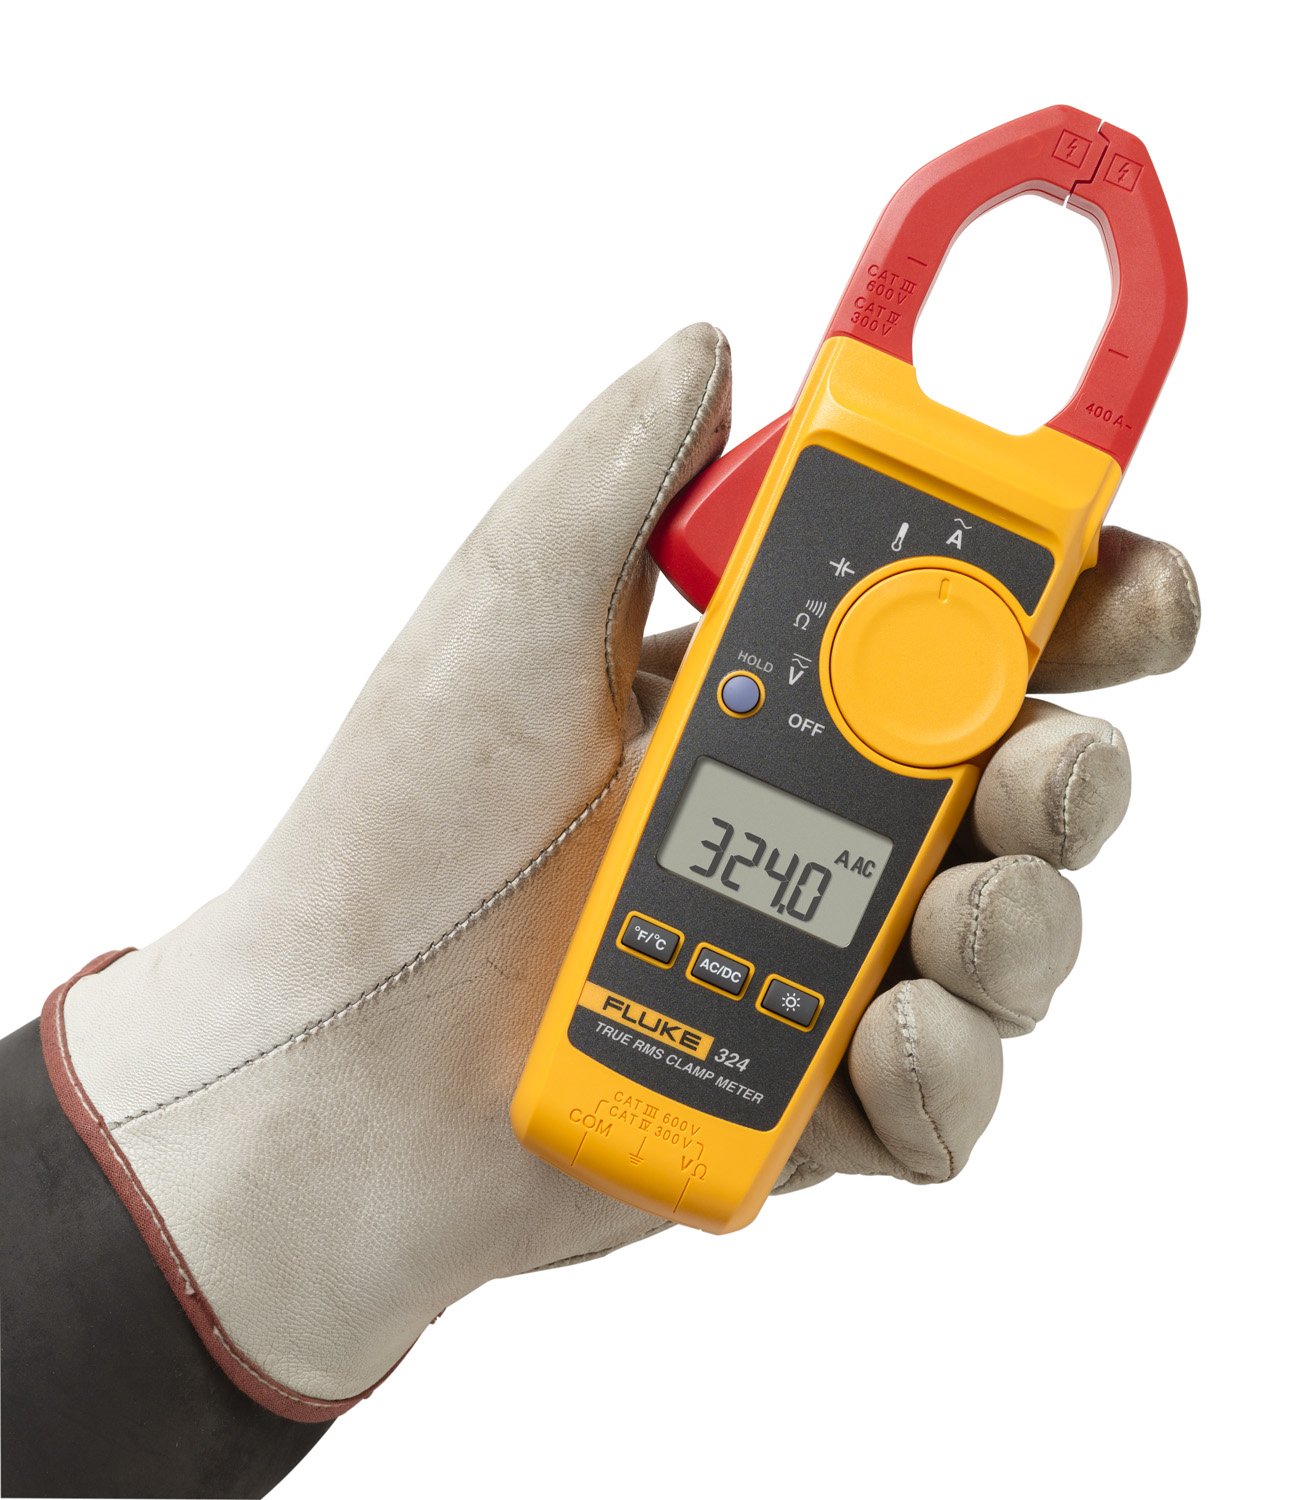 62 MAX+/323/1AC IR Thermometer, Clamp Meter and Voltage Detector Kit